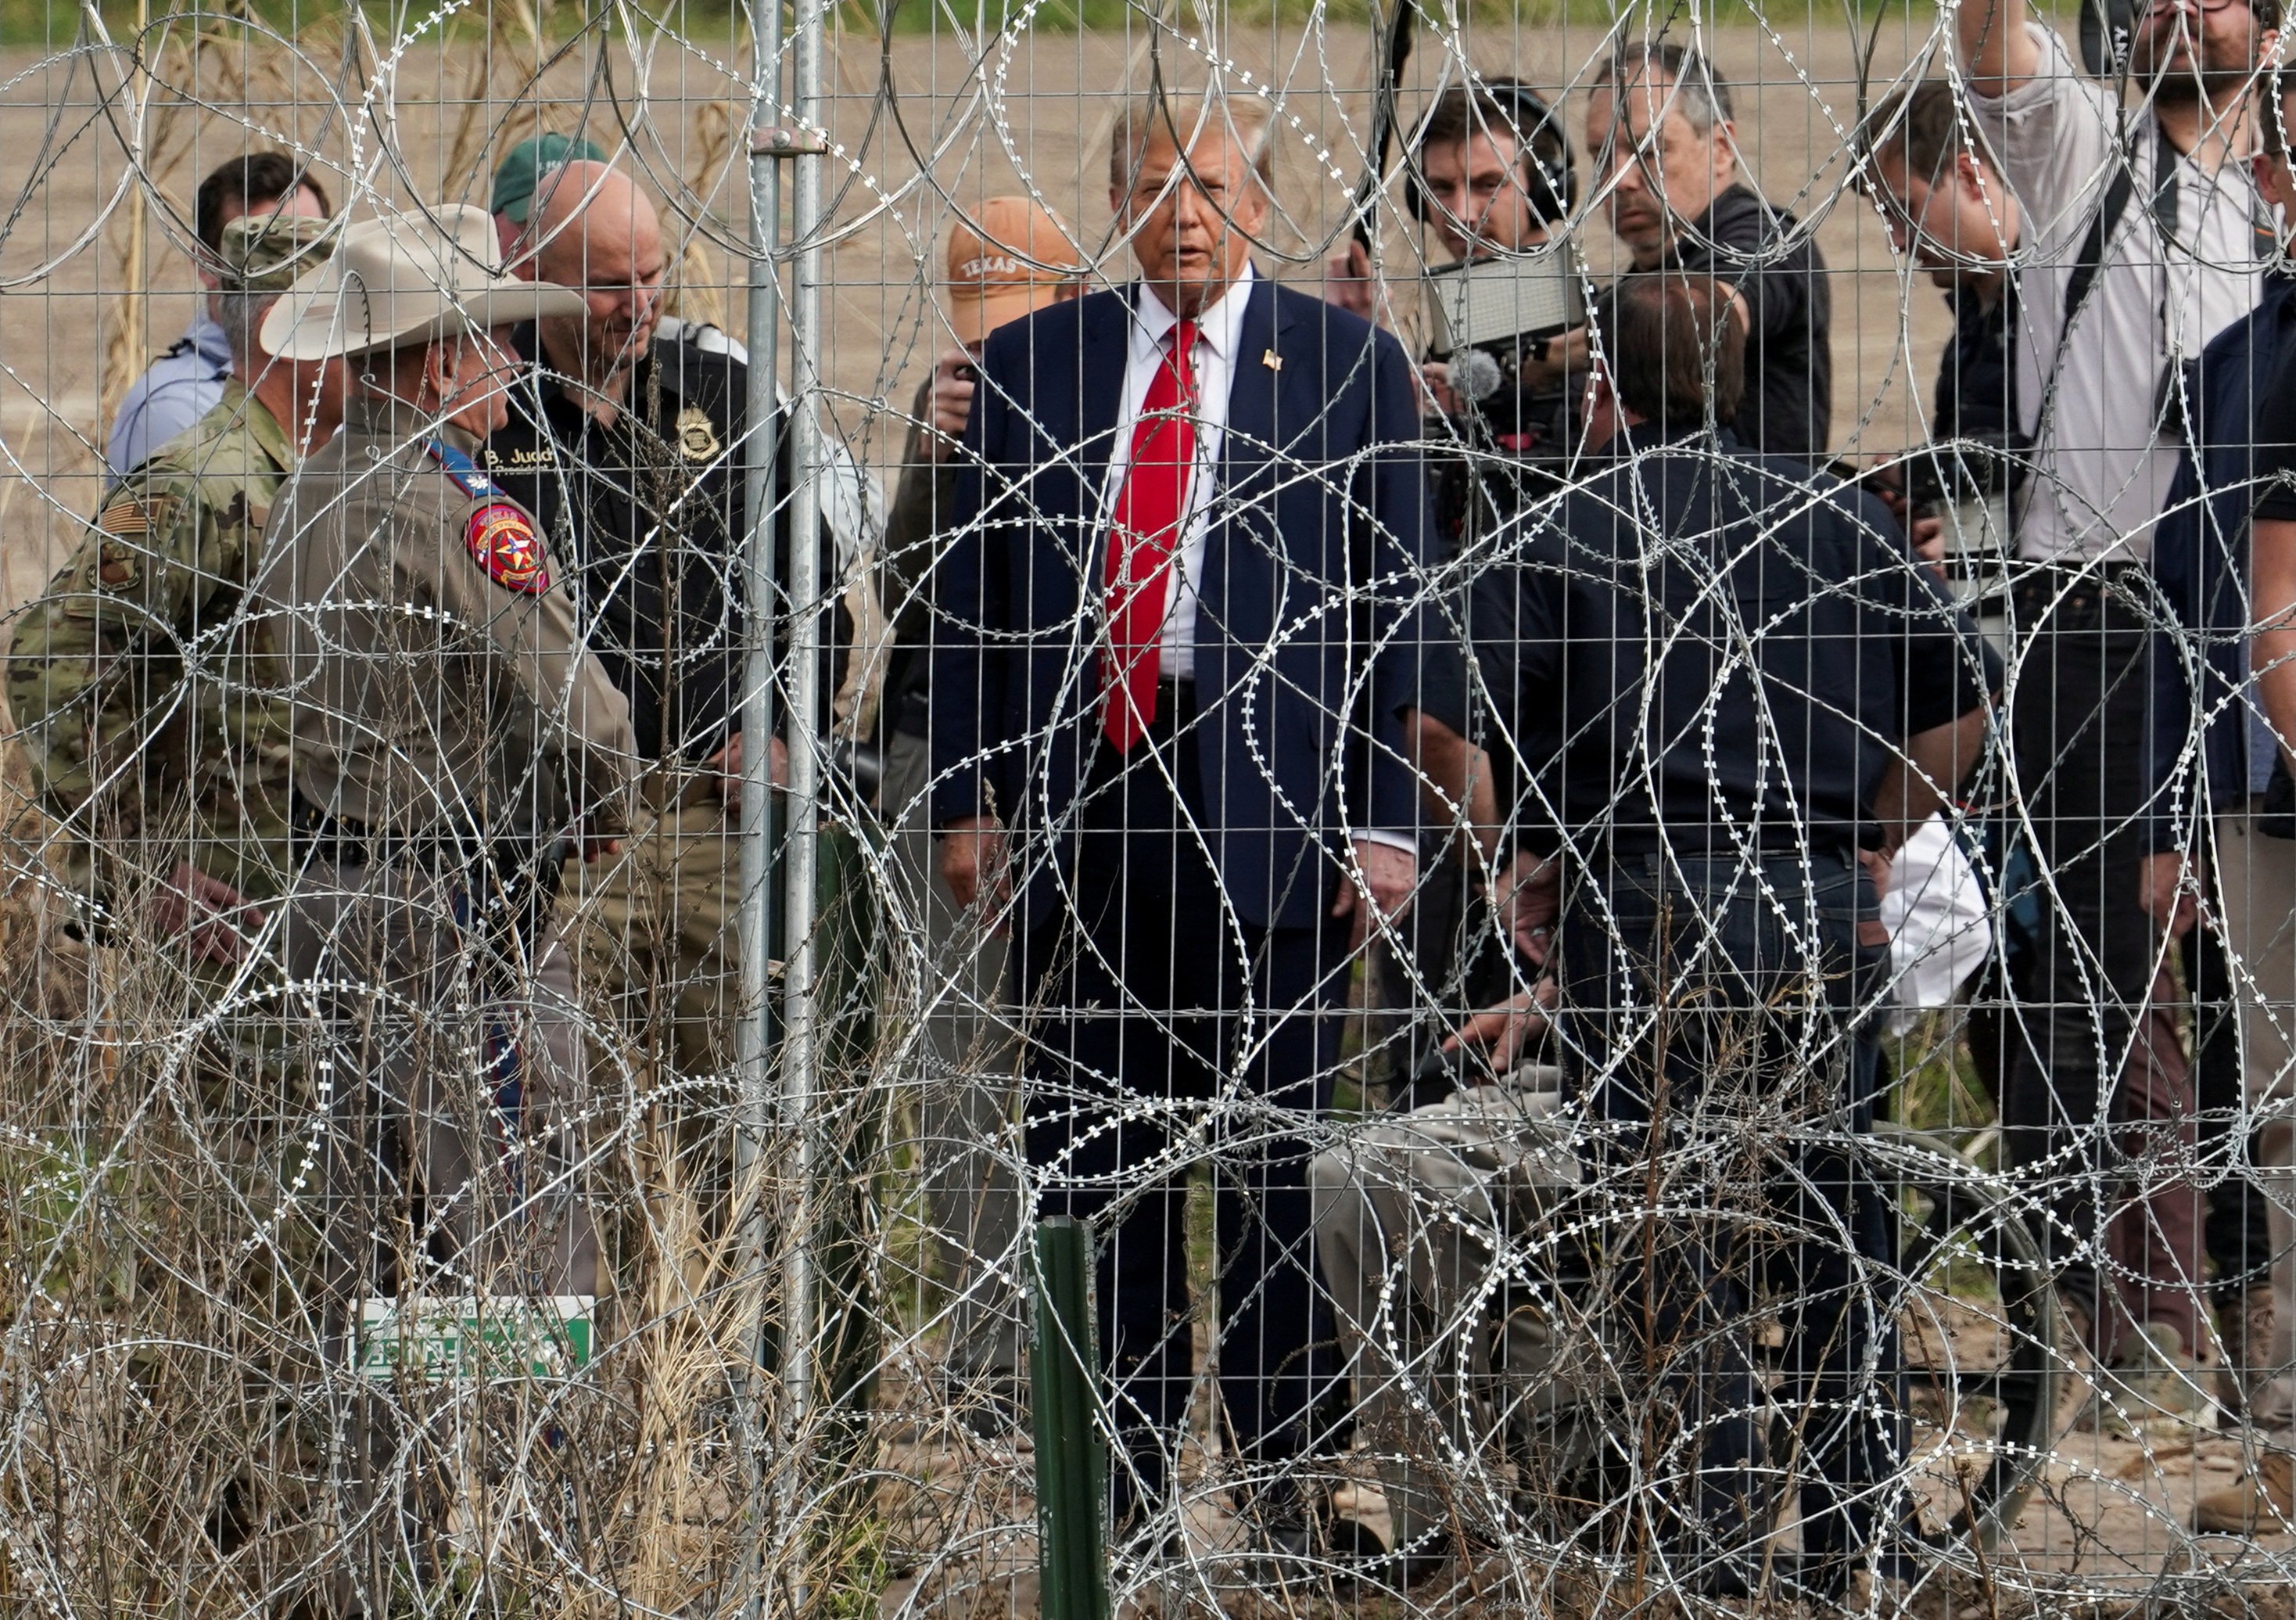 Republican presidential candidate Donald Trump visits the US-Mexico border at Eagle Pass, Texas, on Thursday. Photo: Reuters